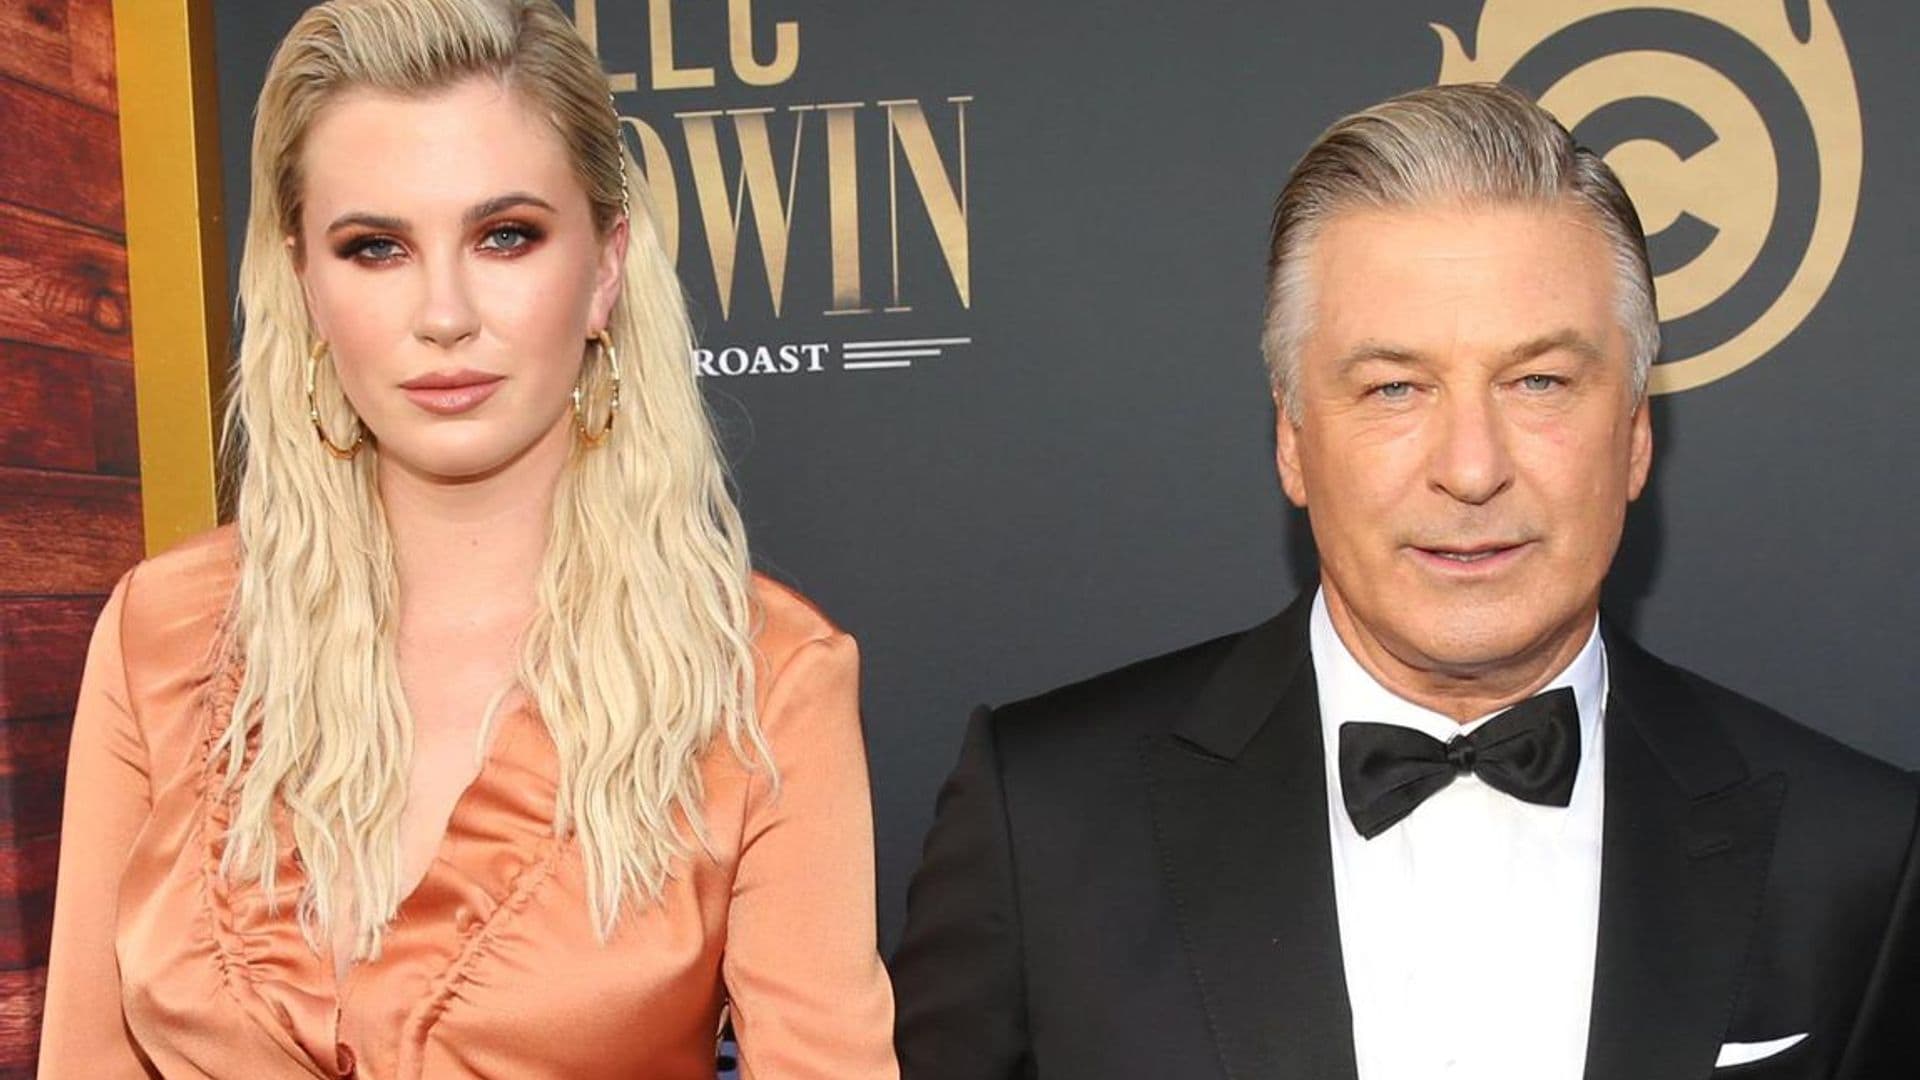 Alec Baldwin’s daughter Ireland opens up about mental health struggles